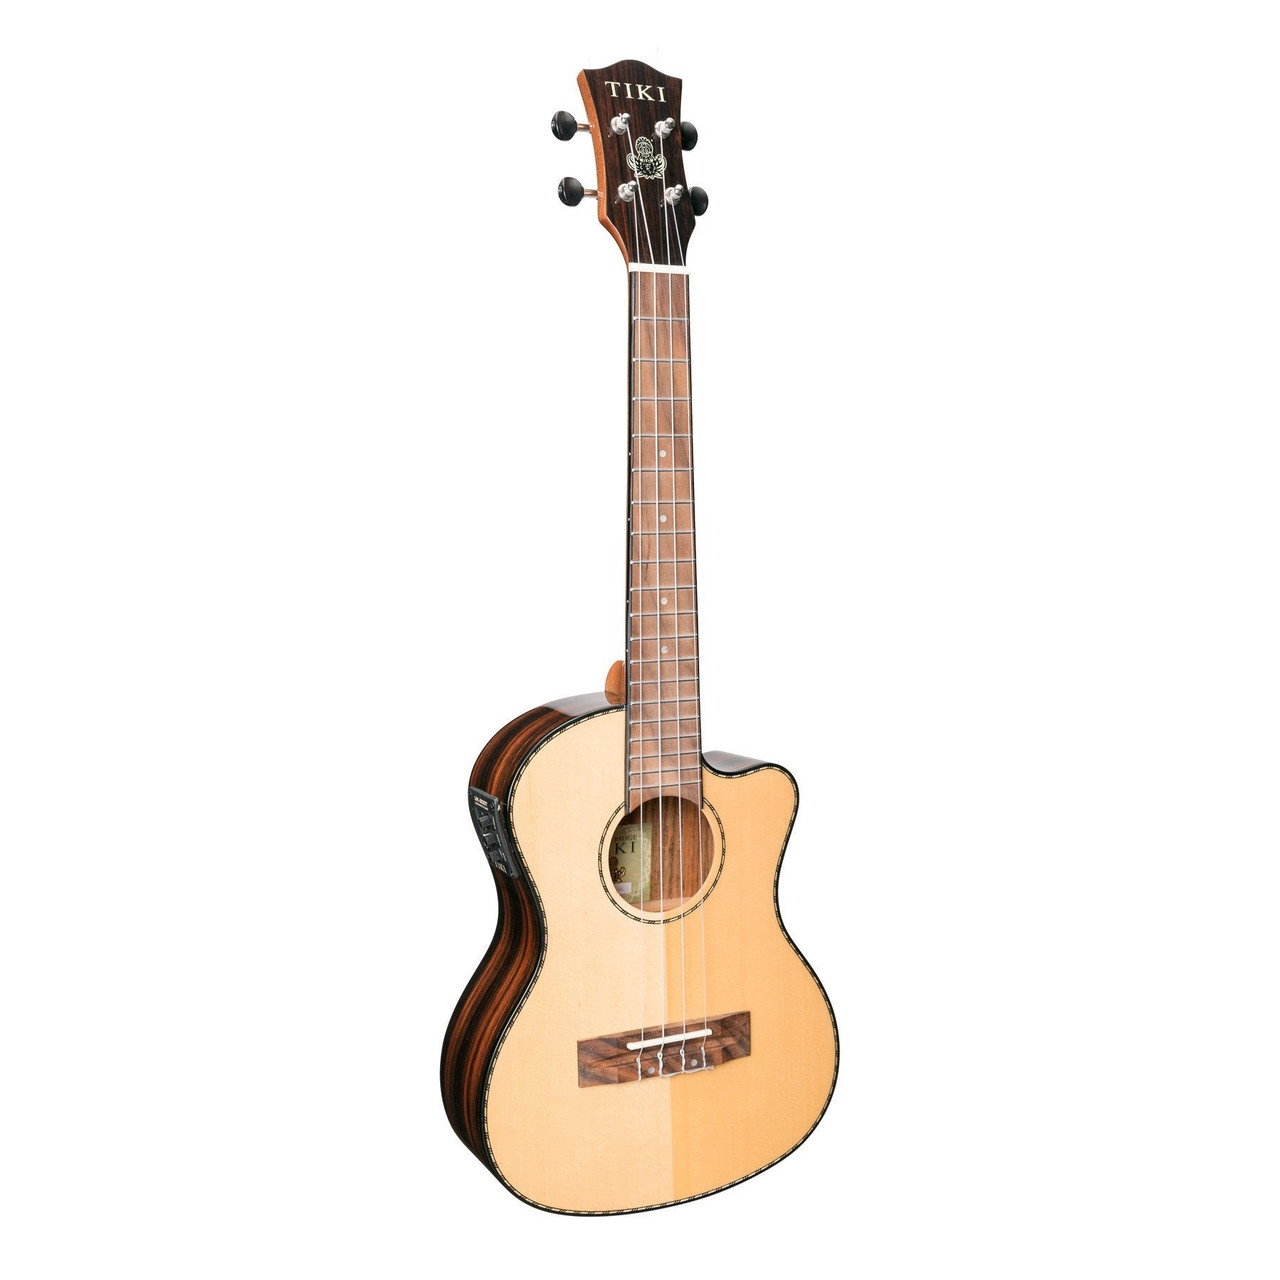 https://cdn.shopify.com/s/files/1/1636/6967/products/Tiki-22-Series-Spruce-Solid-Top-Electric-Cutaway-Tenor-Ukulele-with-Hard-Case-Natural-Gloss-TST-22CP-NGL-3_ff0e271a-5cd5-443a-8728-b8b8d4569d02.jpg?v=1630434431